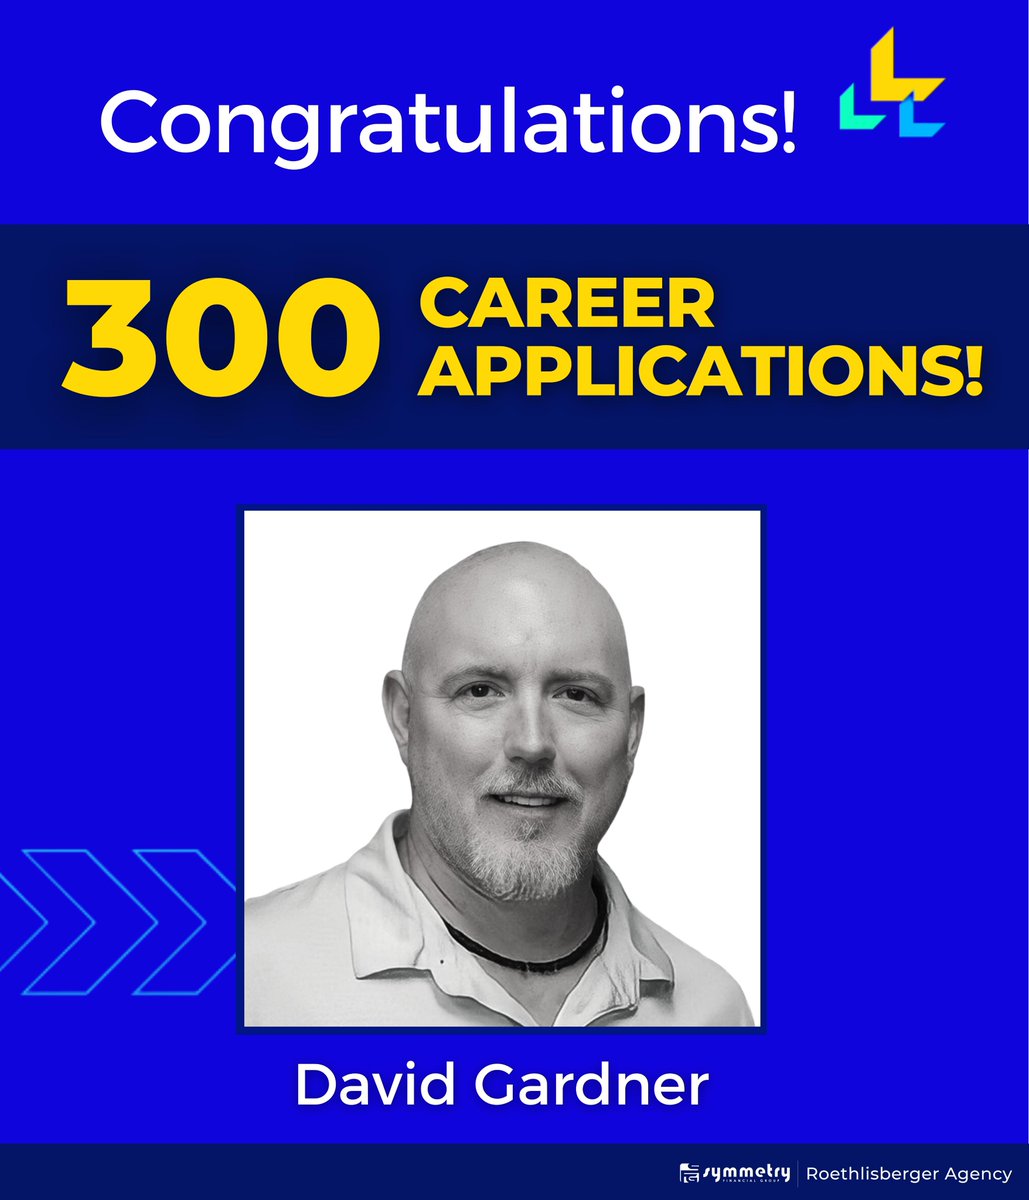 Congratulations to David!! 🎉🔥
 
We're blessed to have you on our team, and your clients are even luckier to have someone as reliable and dedicated as you. 

The next stop? 500 applications! 💪🚀
'
'
'
#symmetryfinancialgroup #Quility #LifeInsuranceAgent #LifeInsurance #SocialQ